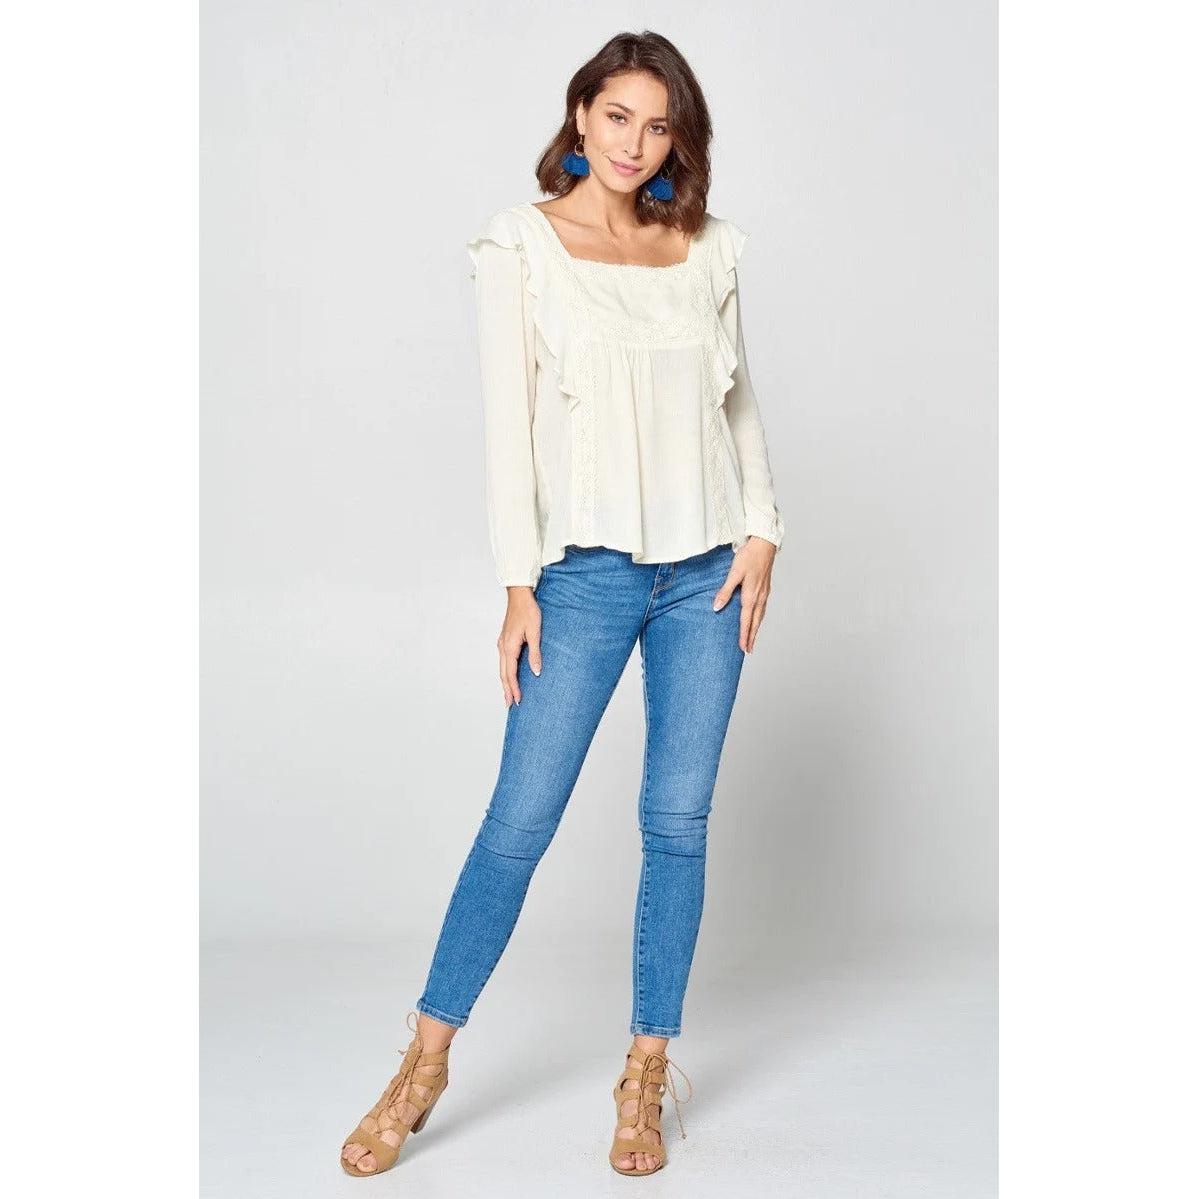 Solid Loose-fit Gauze Peasant Blouse-Shirts & Tops-NXTLVLNYC